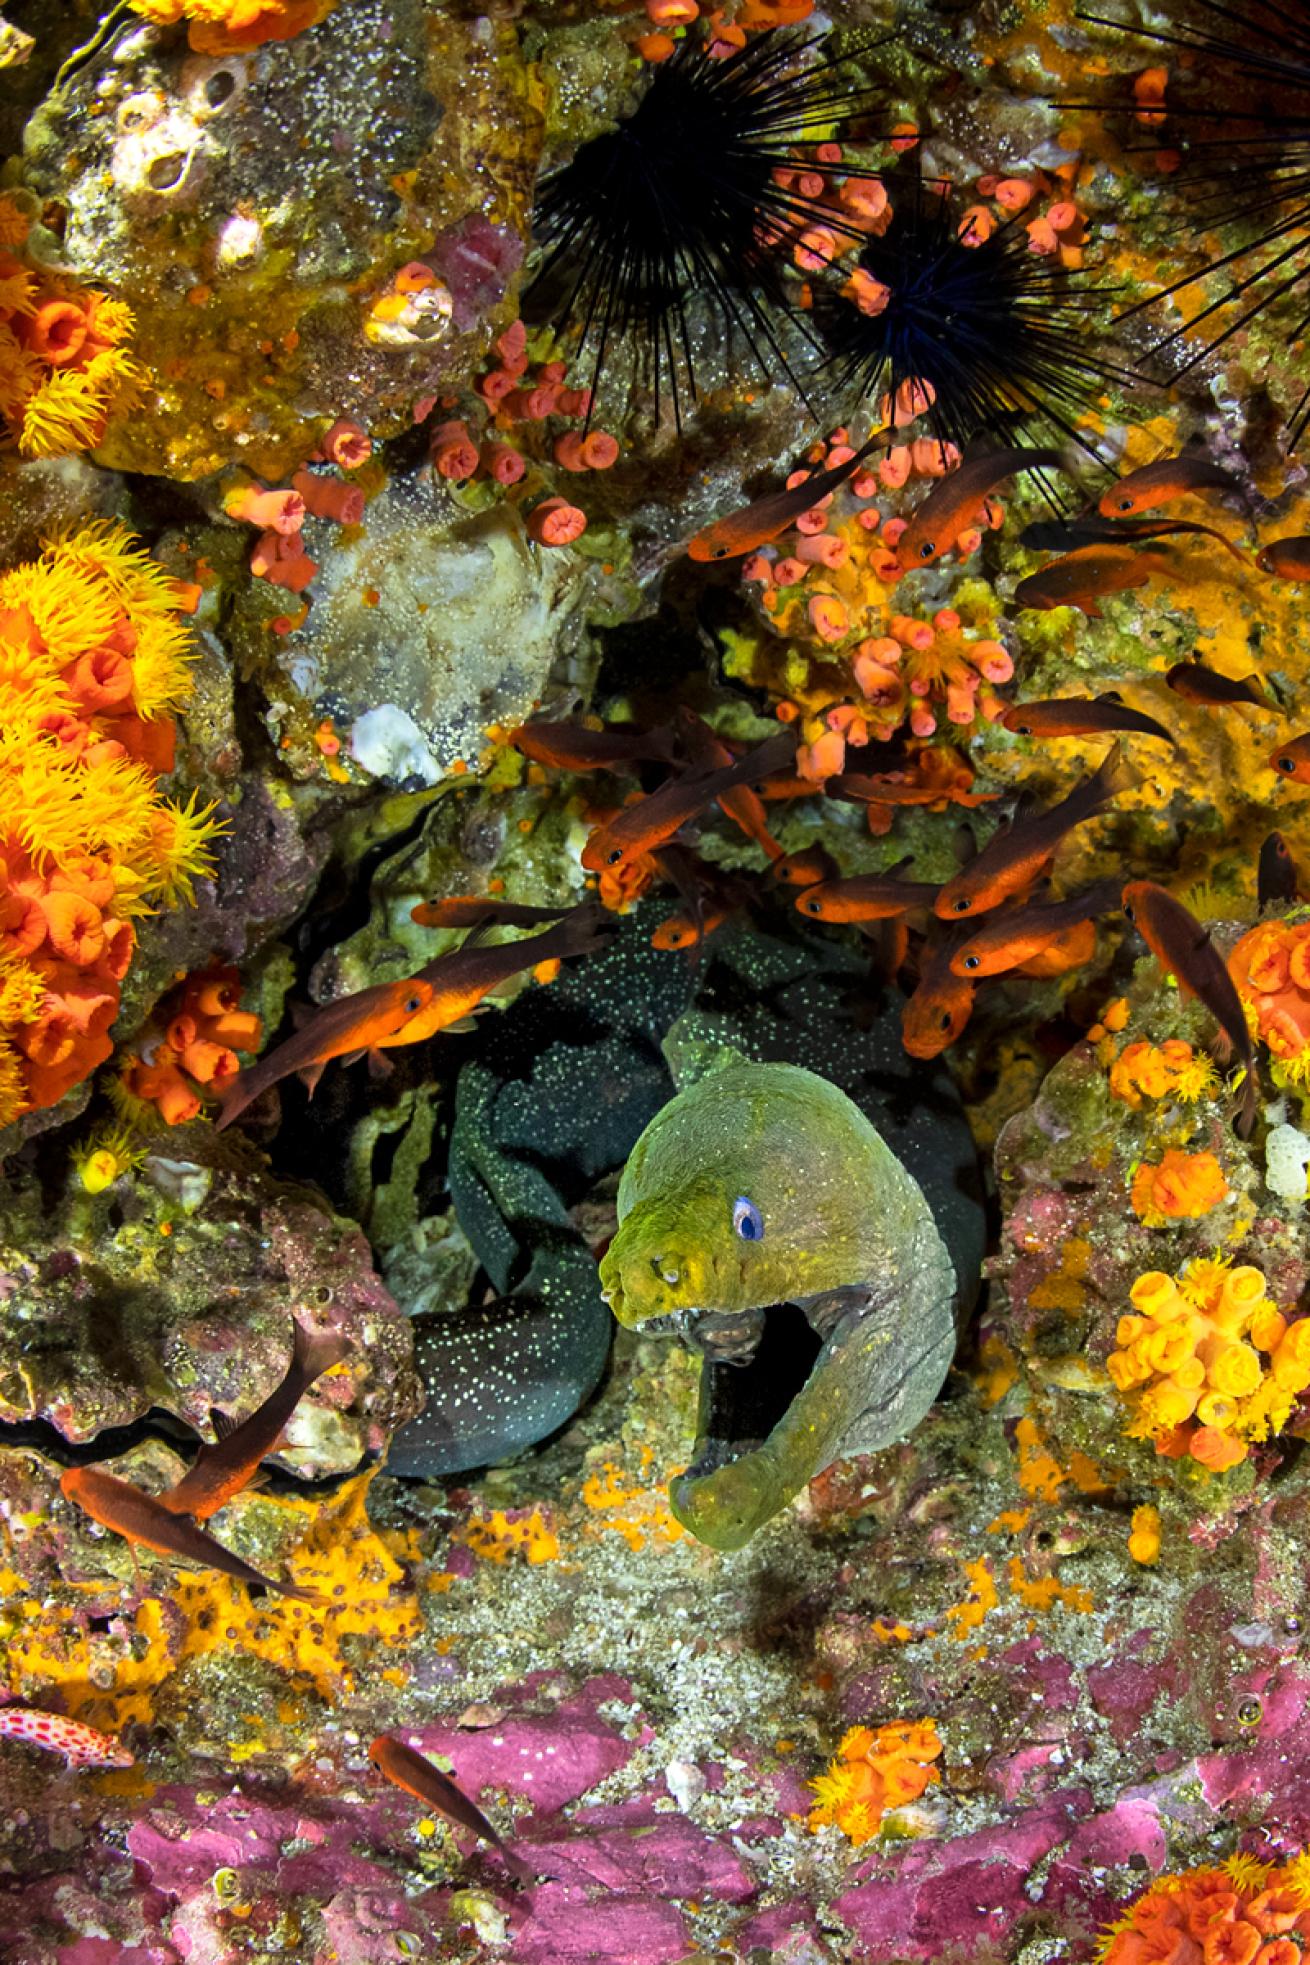 Moray eels are in nearly every crack and crevice around the island.